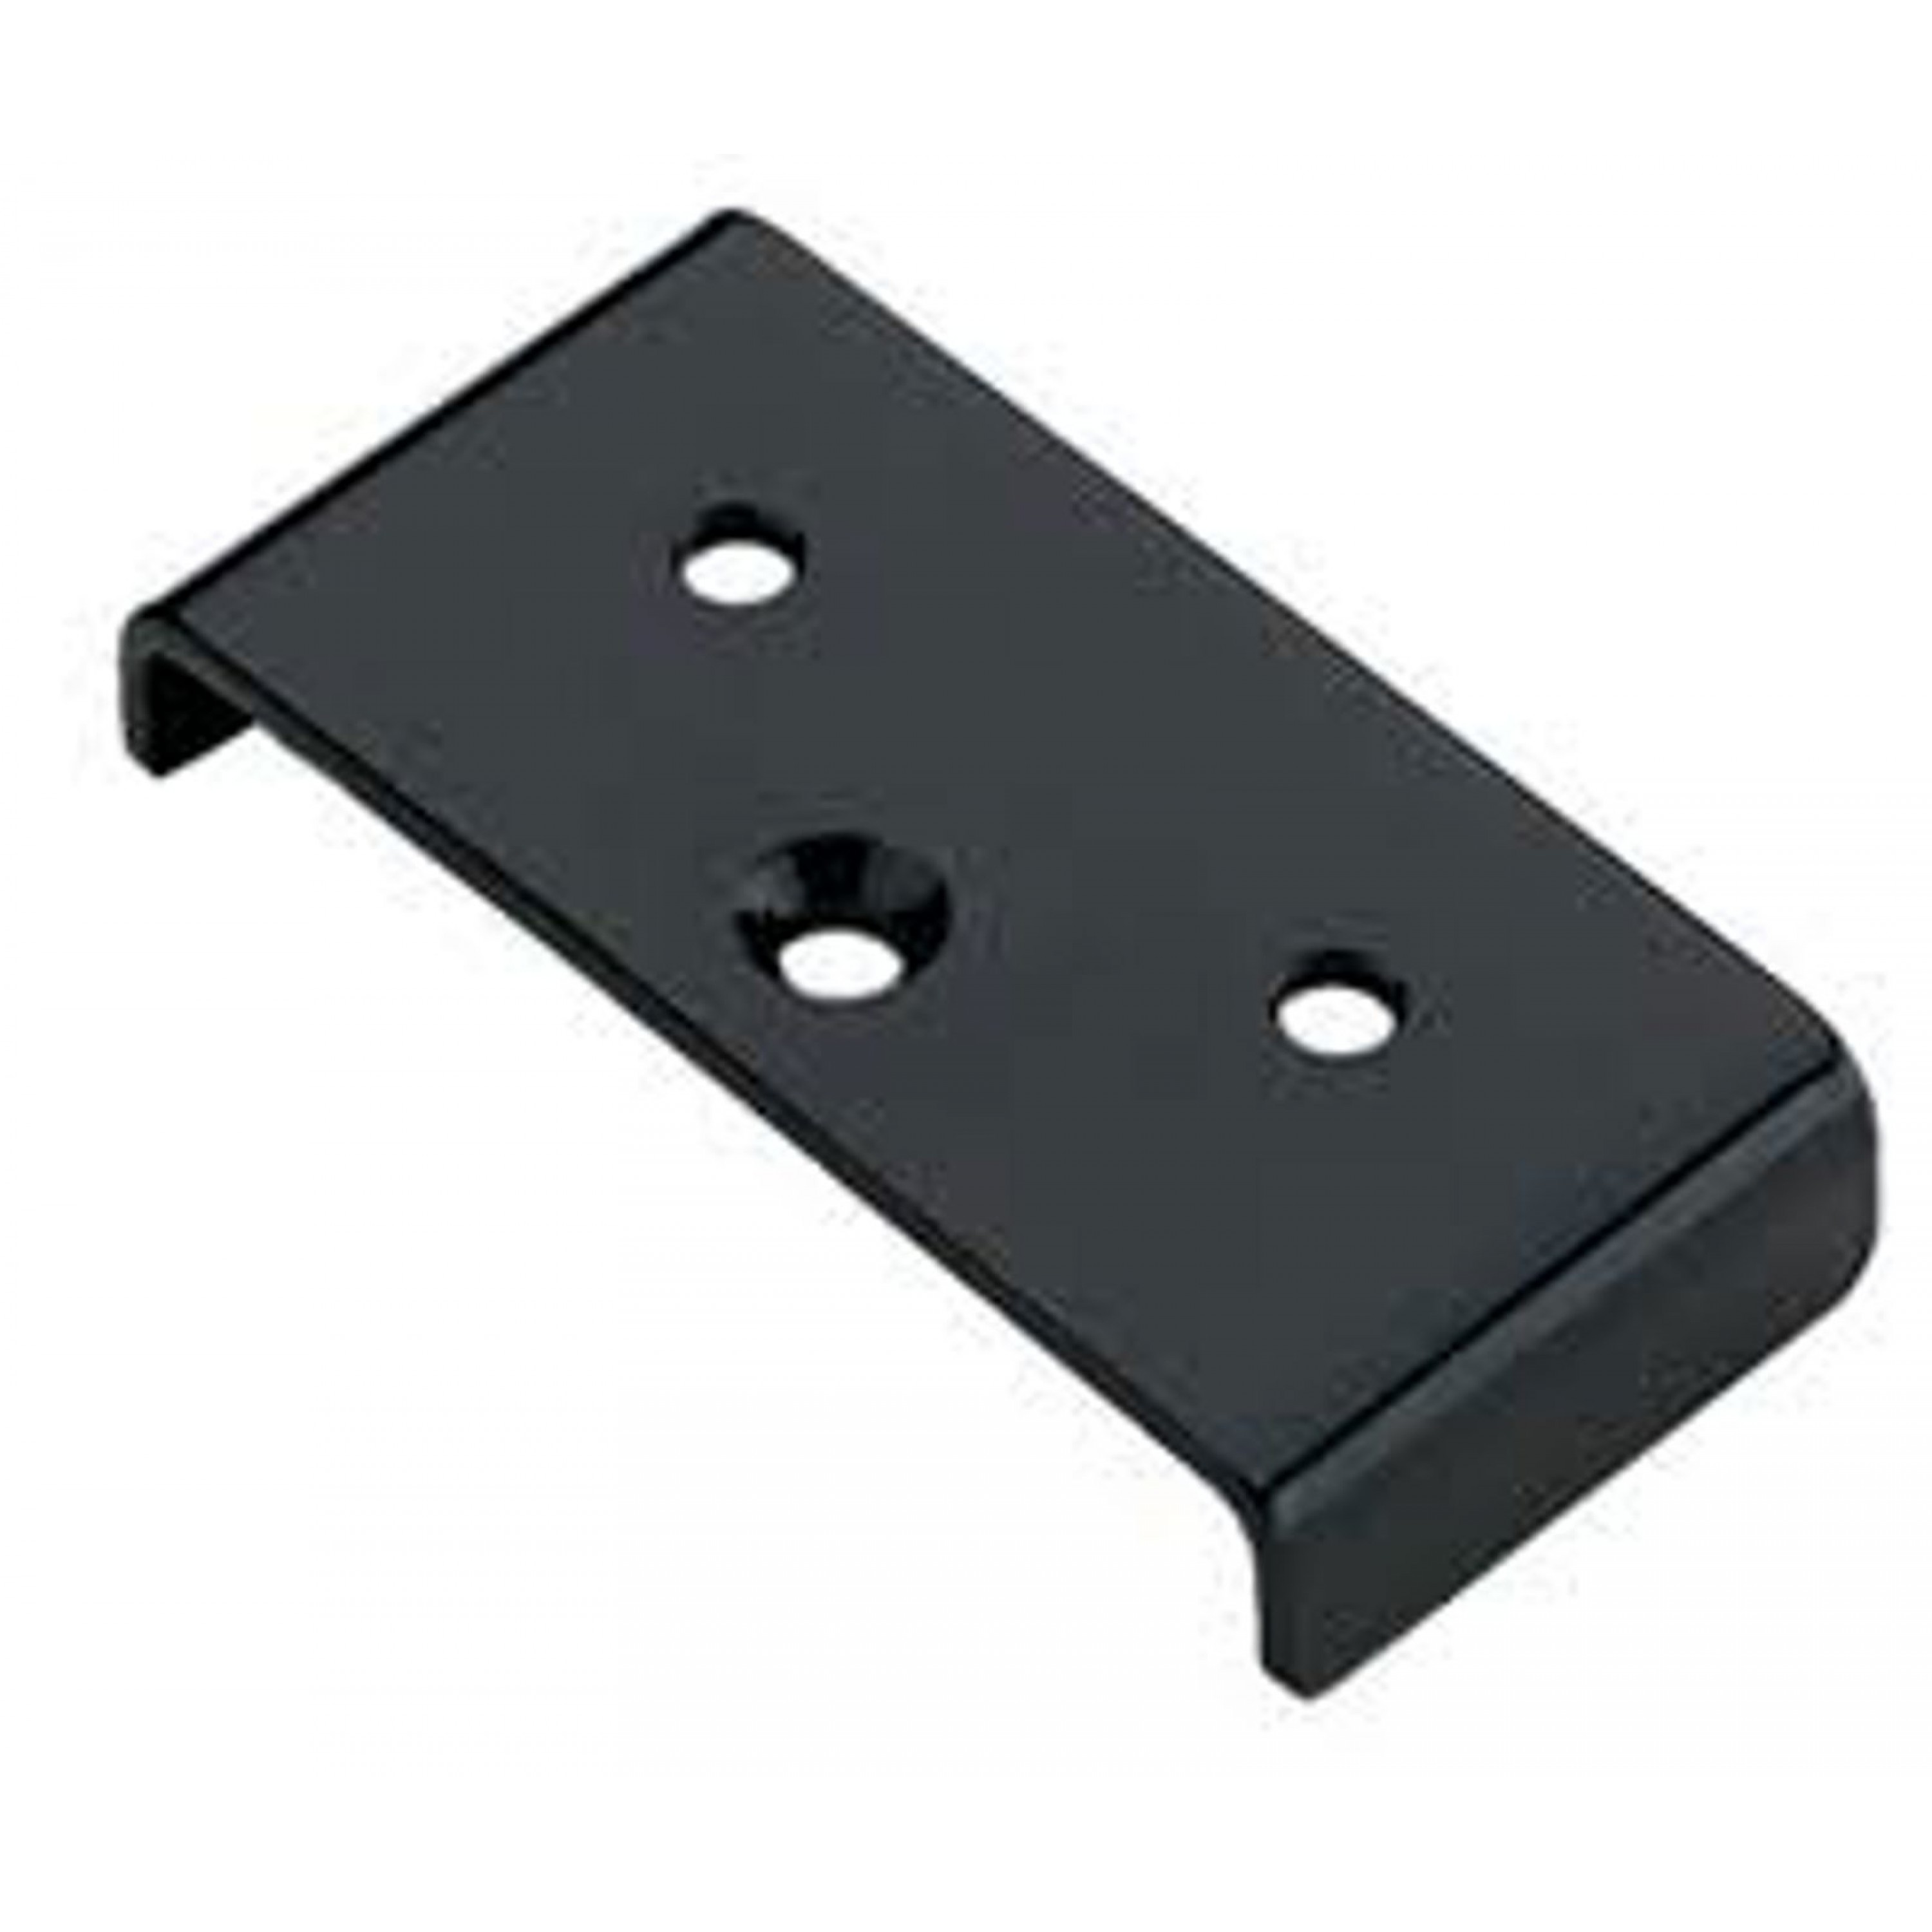 CAM CLEAT MAST ADAPTER PLATE